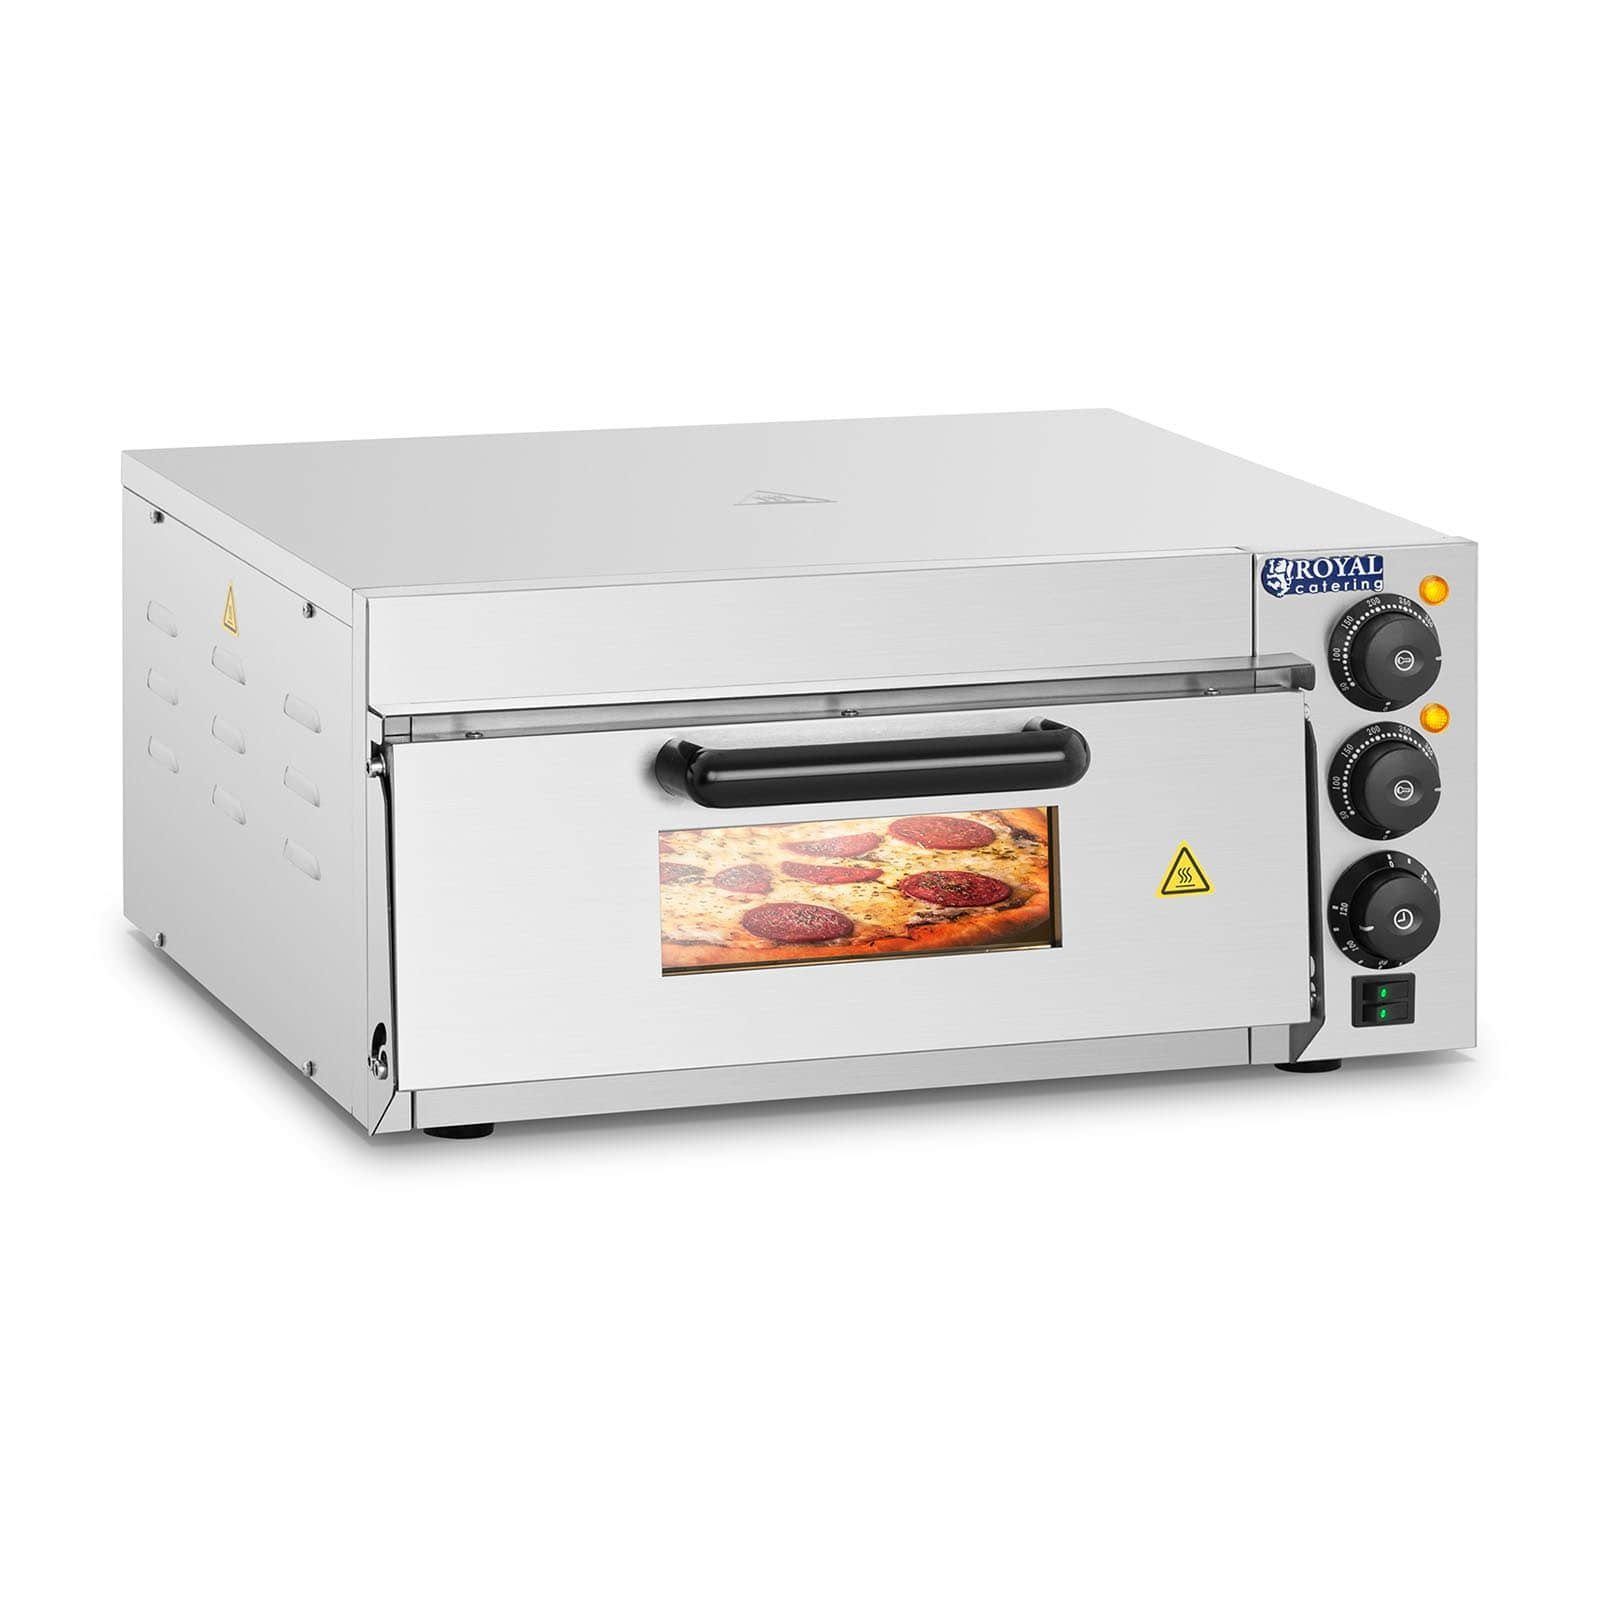 Royal Catering Pizzaofen Pizzaofen – mit Schamottestein – 1 Kammer – 2000 W – Royal Catering